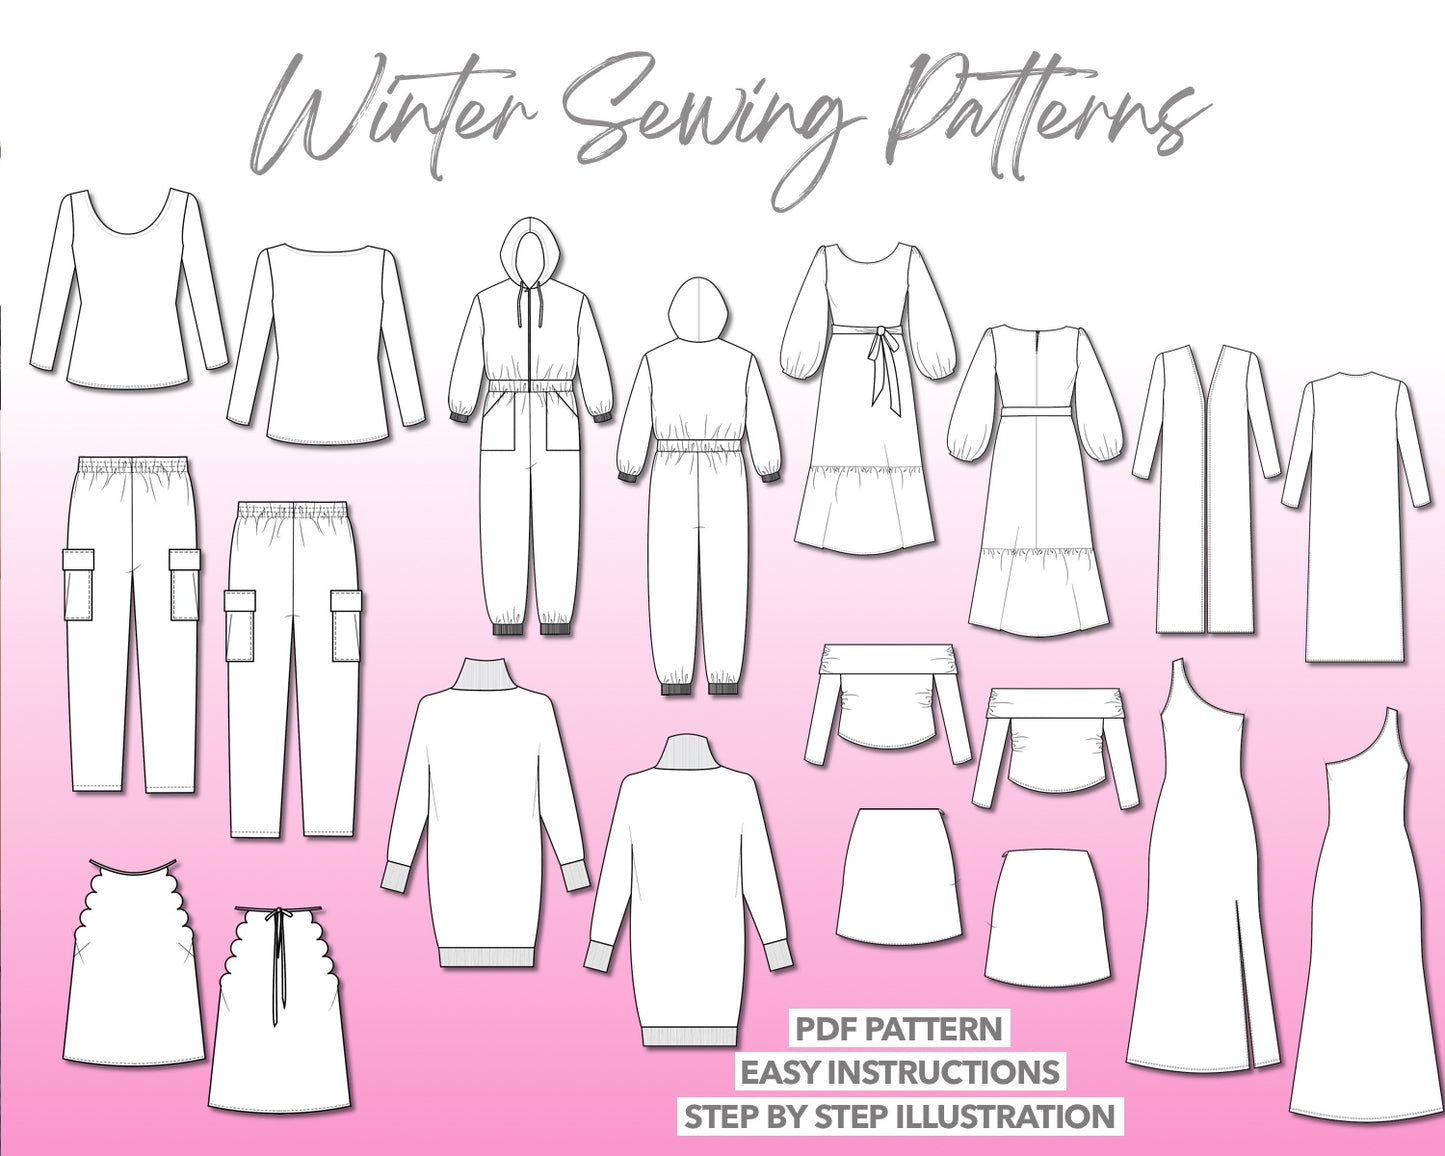 Winter sewing pattern pdf with easy instructions and step by step illustrations.